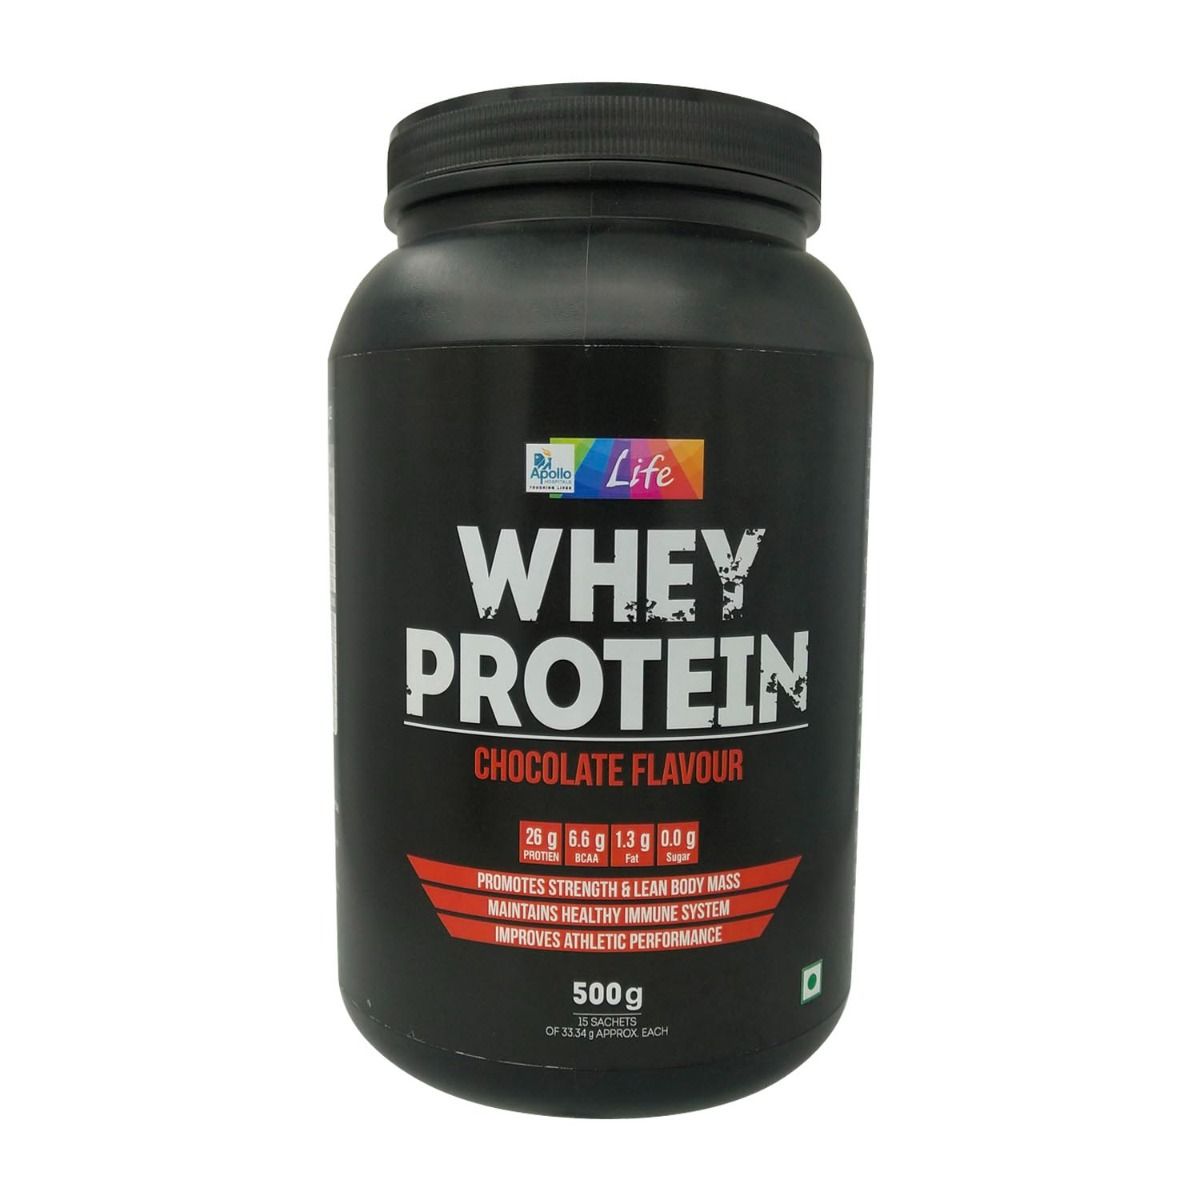 Apollo Life Whey Protein Chocolate Flavour Powder, 500 gm, Pack of 1 